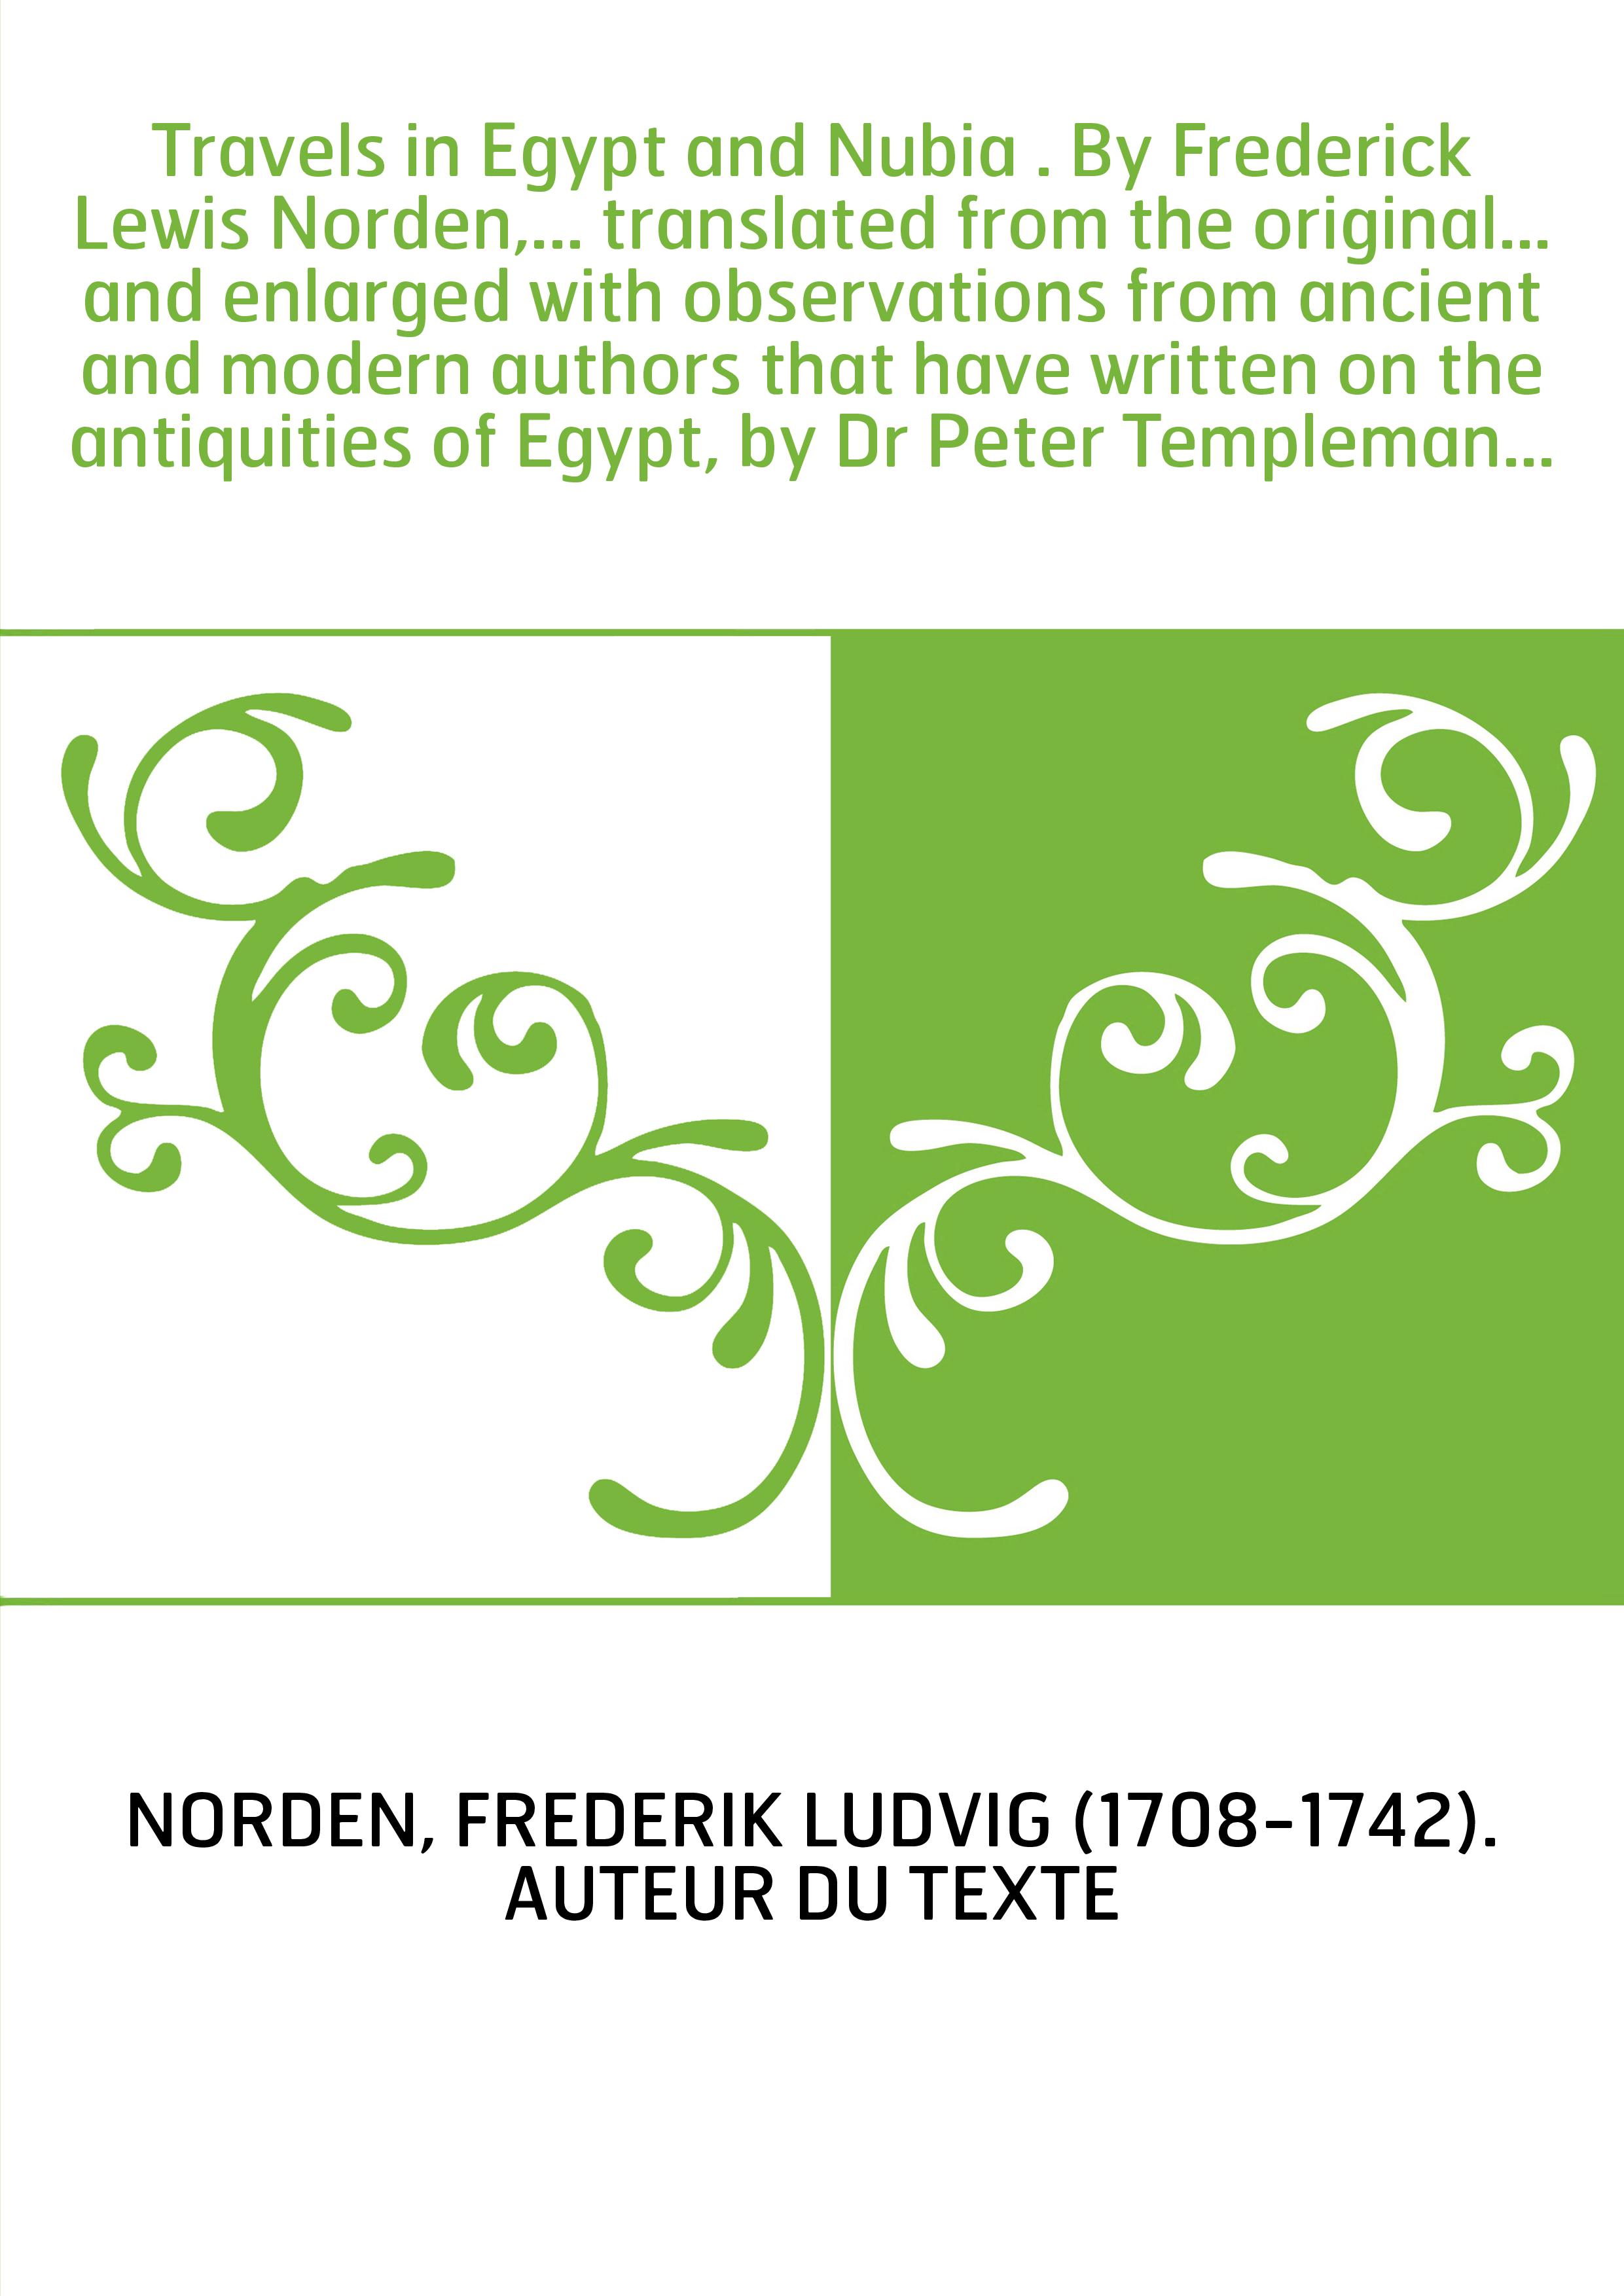 Travels in Egypt and Nubia . By Frederick Lewis Norden,... translated from the original... and enlarged with observations from a